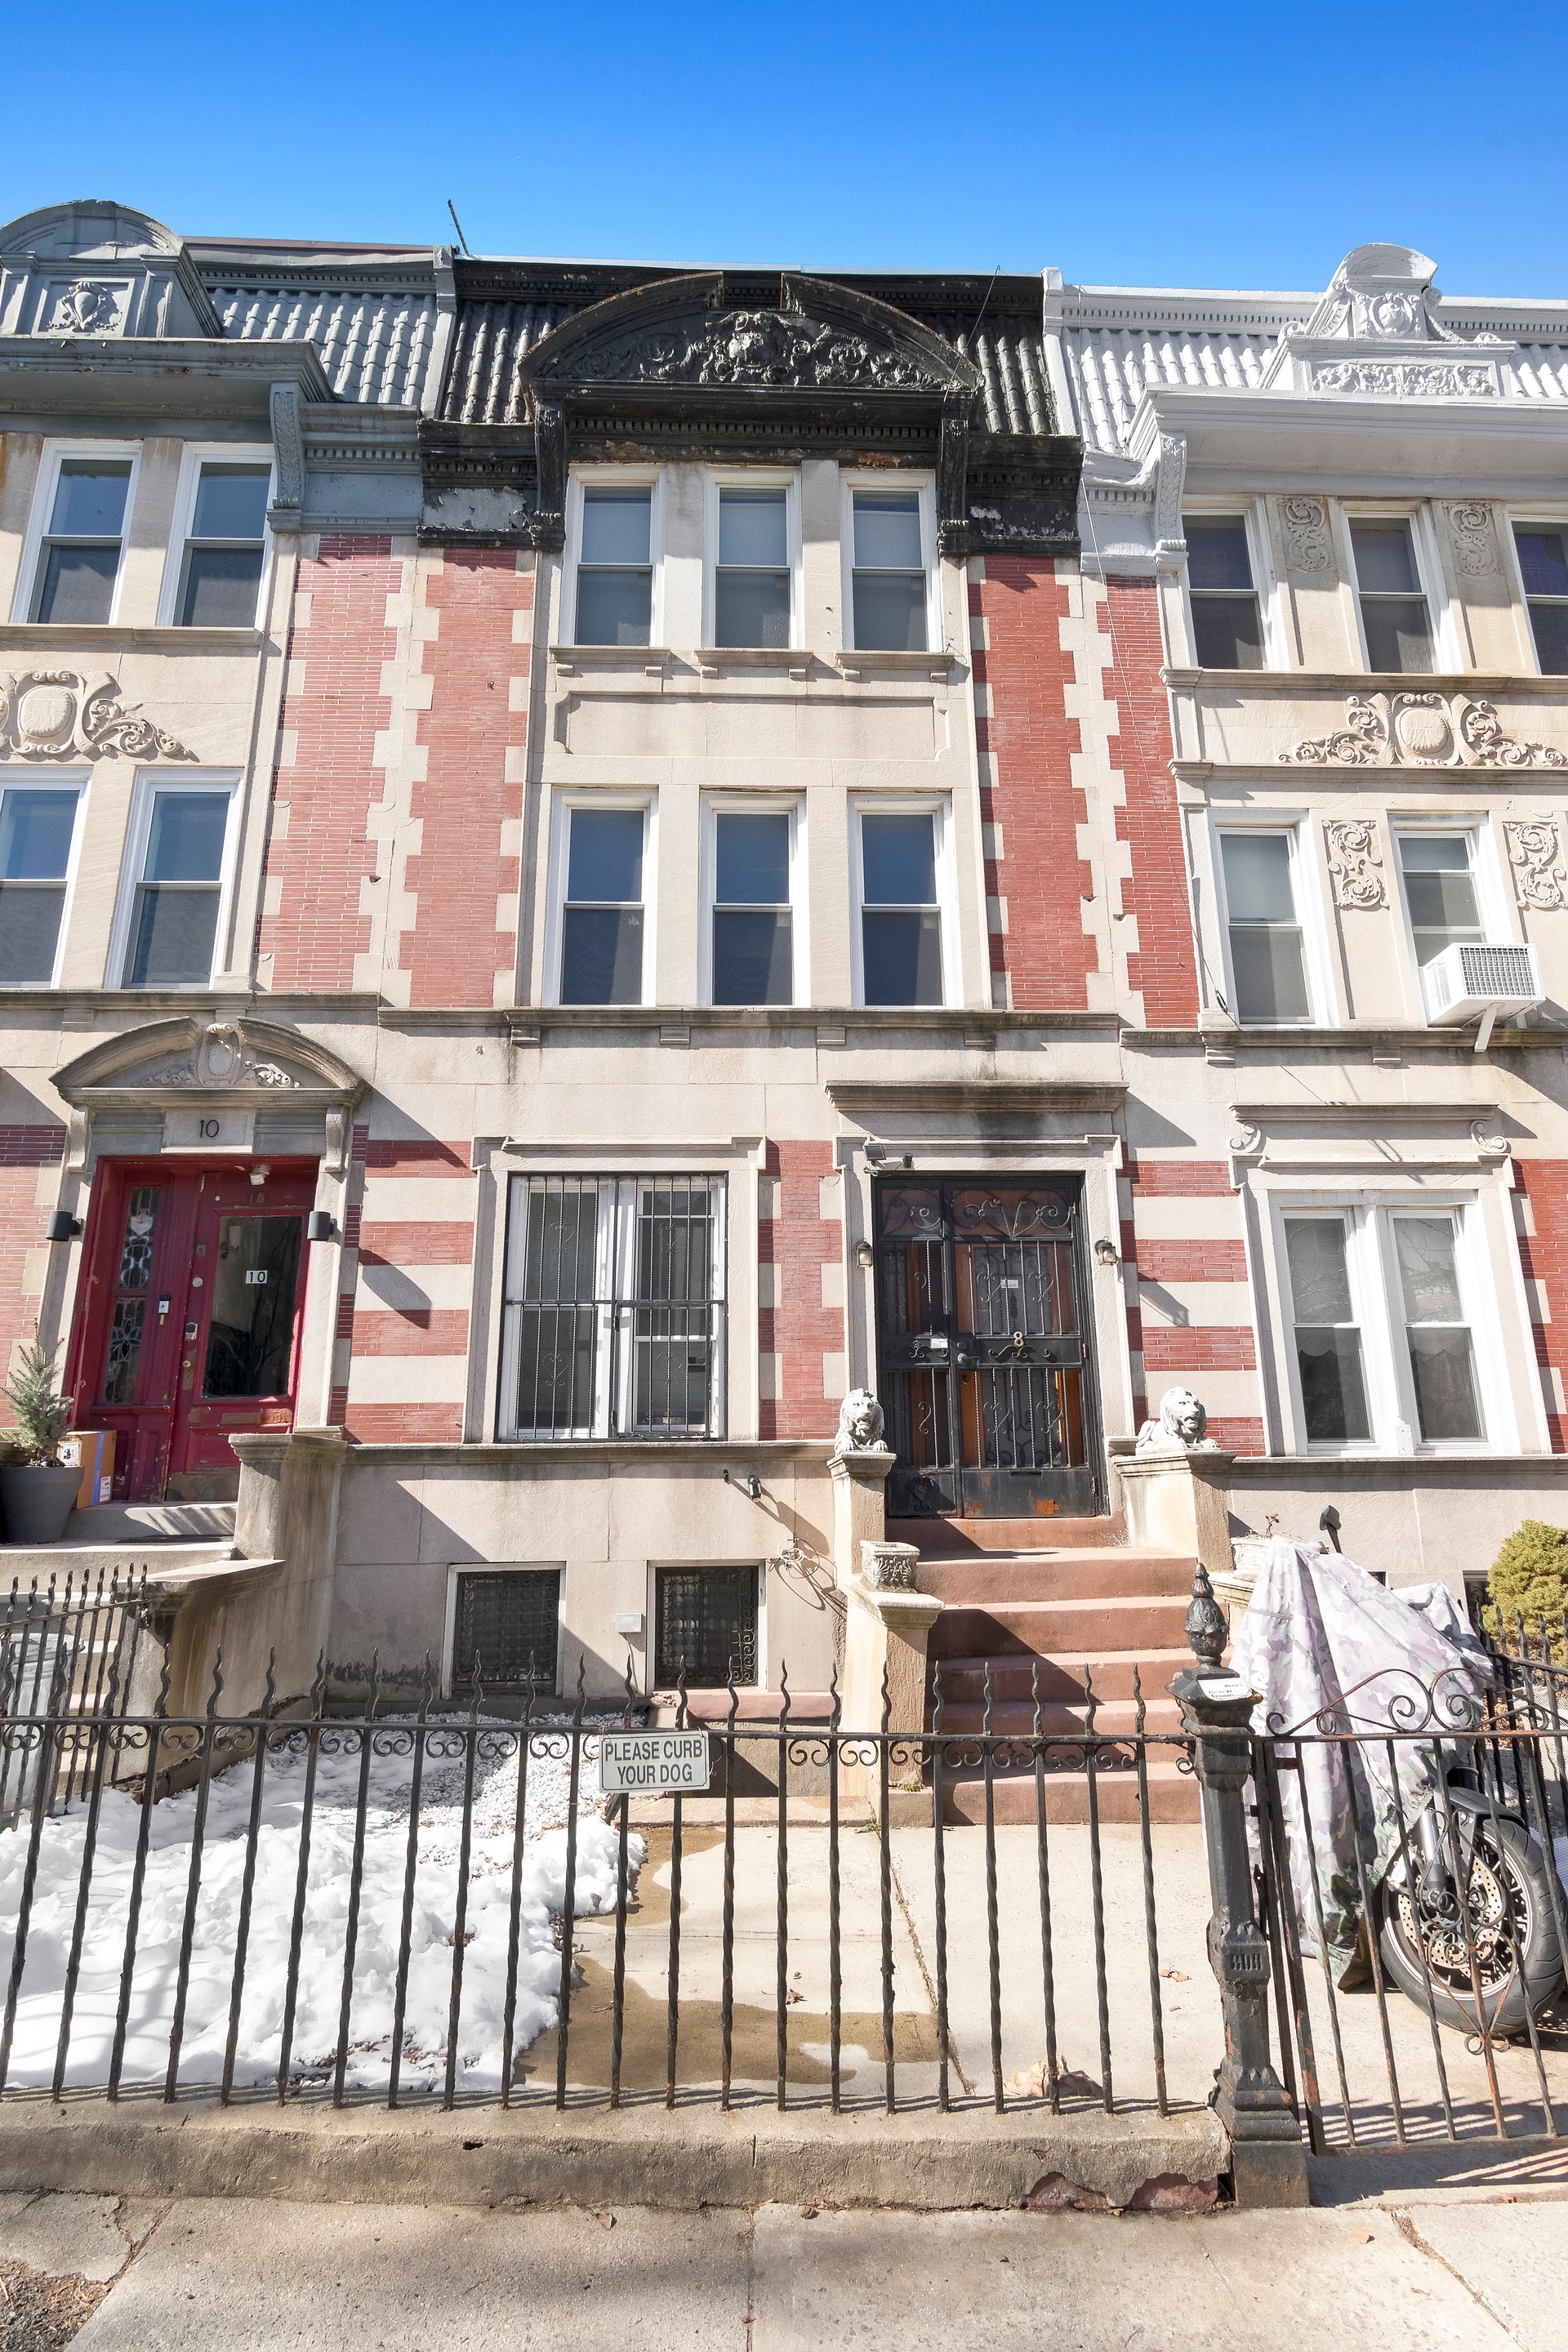 8 St Charles Place, Crown Heights, Brooklyn, New York - 5 Bedrooms  
2.5 Bathrooms  
9 Rooms - 